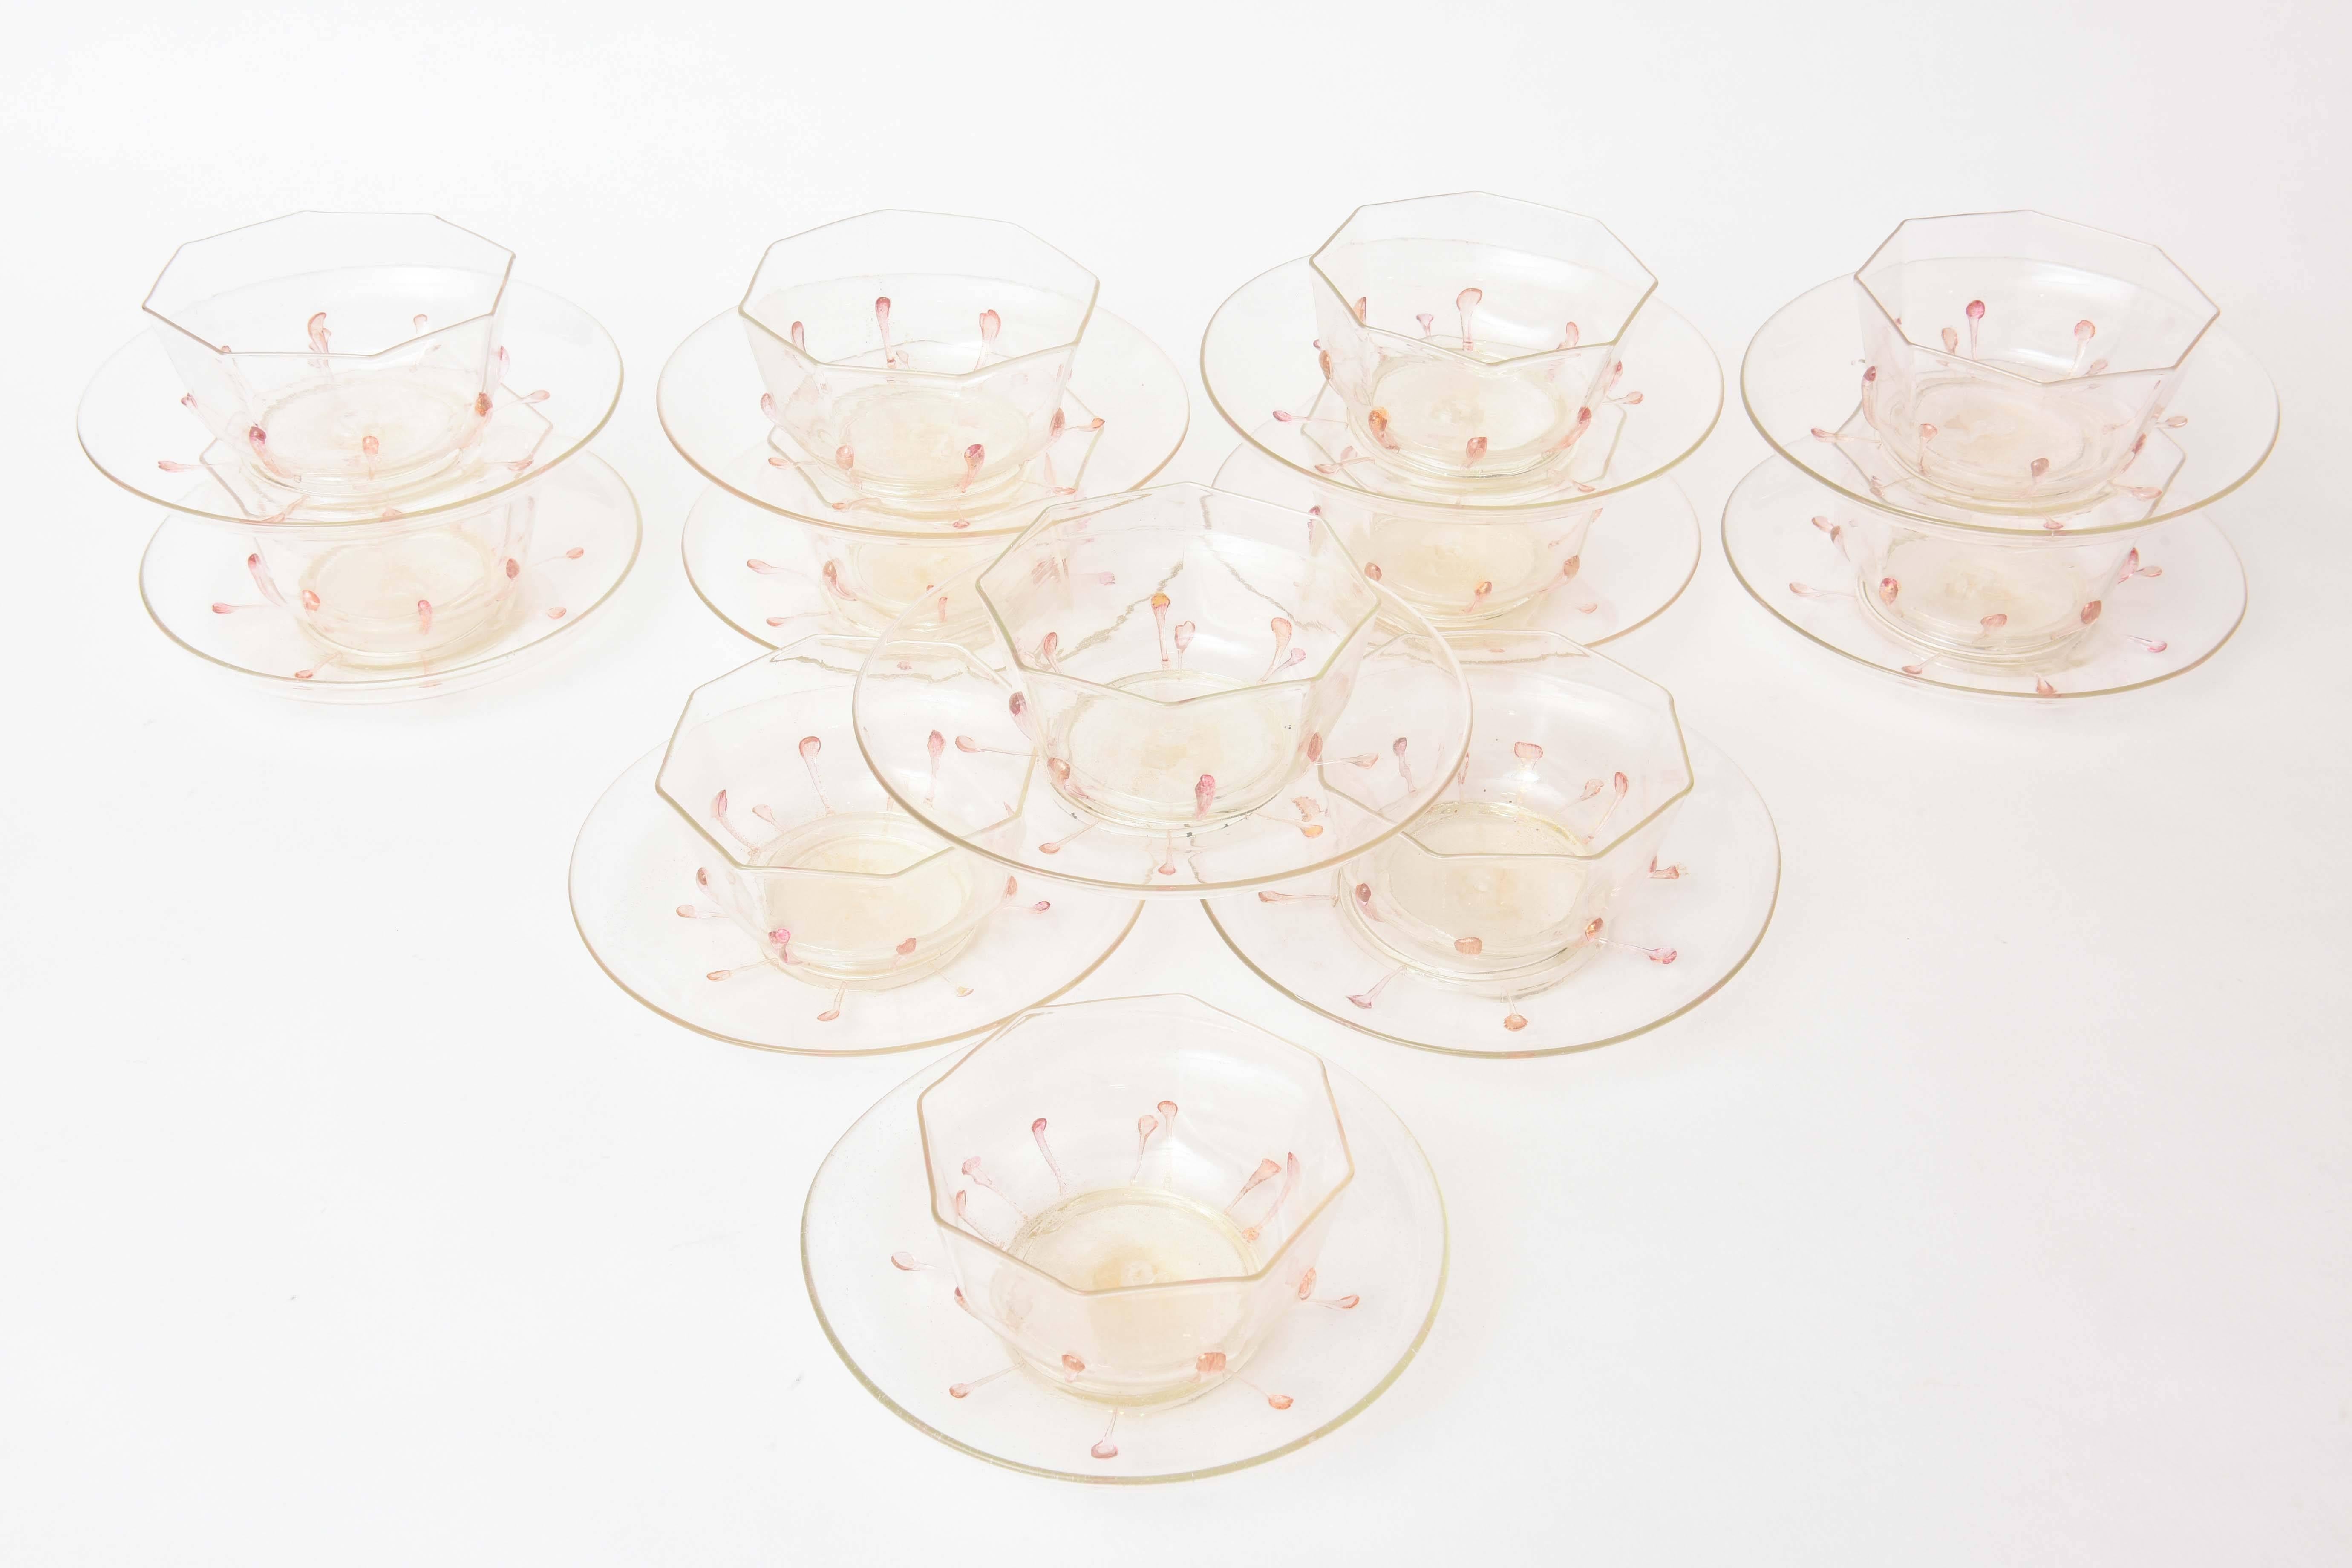 A delightful antique set featuring 24-karat blown gold inclusion on a pretty pastel pink. Nicely shaped and in wonderful antique condition. Please see our other listings for matching and coordinating pieces. Perfect for dessert or first course and